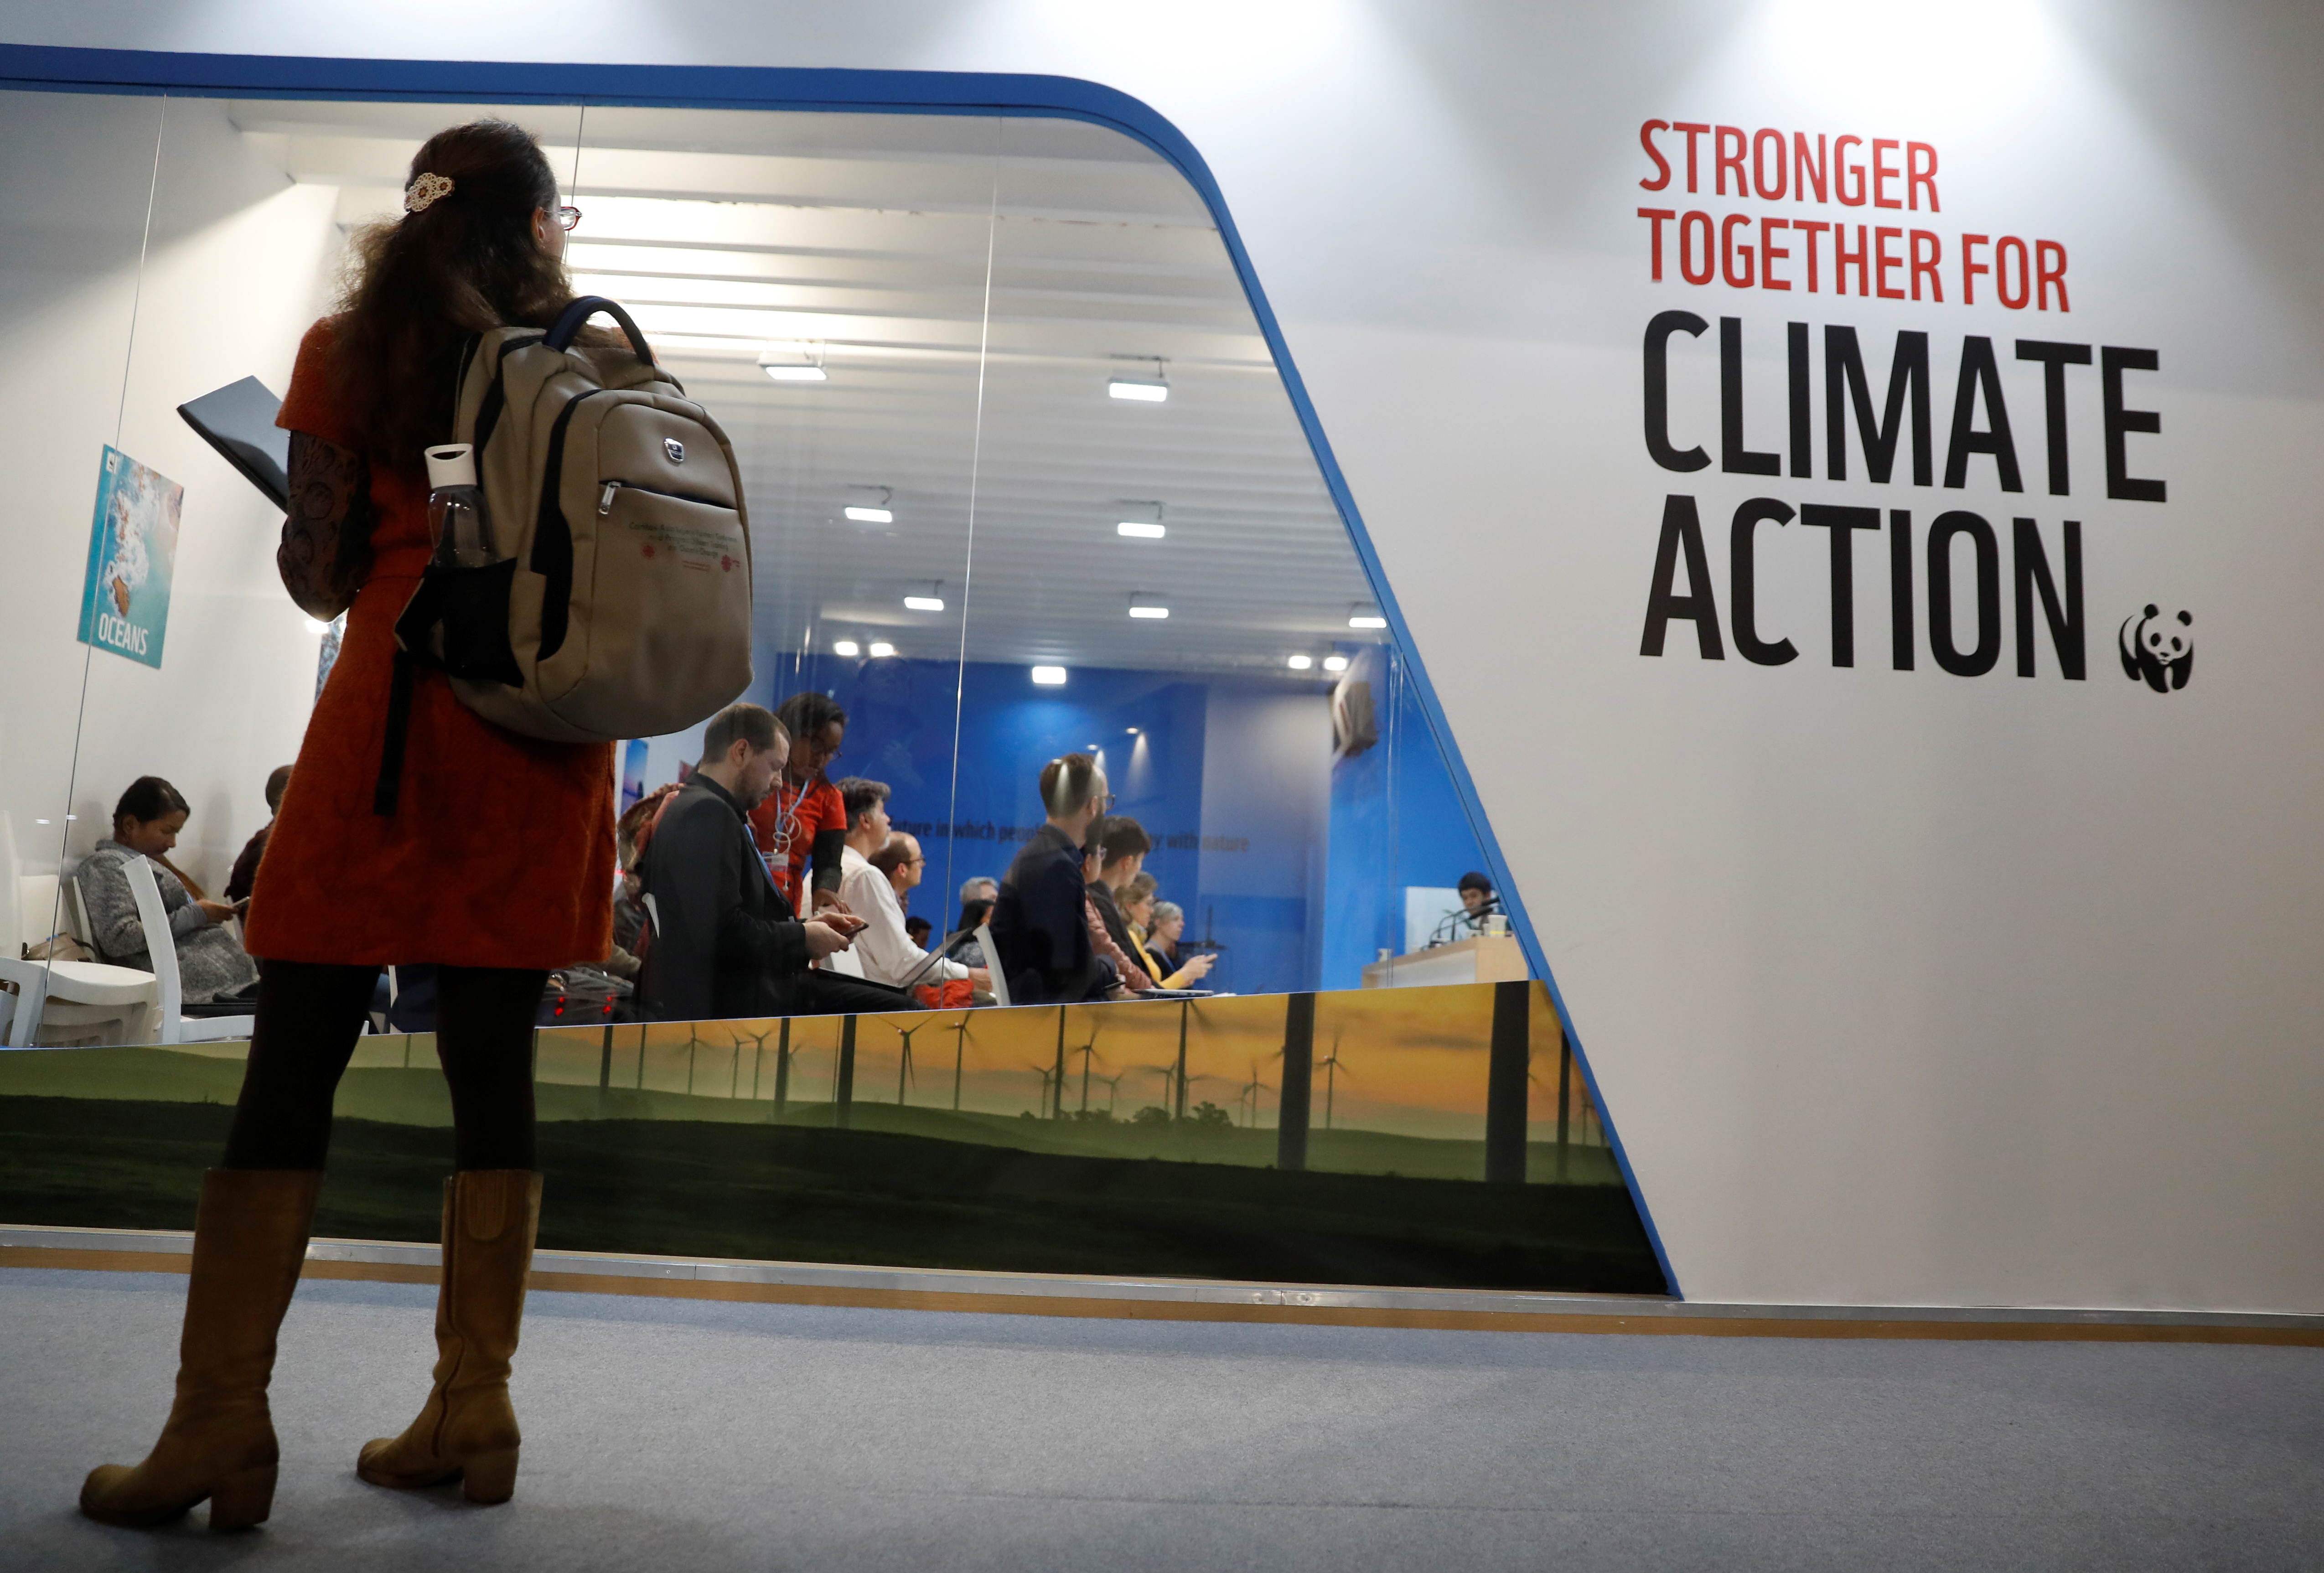 A woman watches an exhibition inside the venue of the COP24 U.N. Climate Change Conference 2018 in Katowice